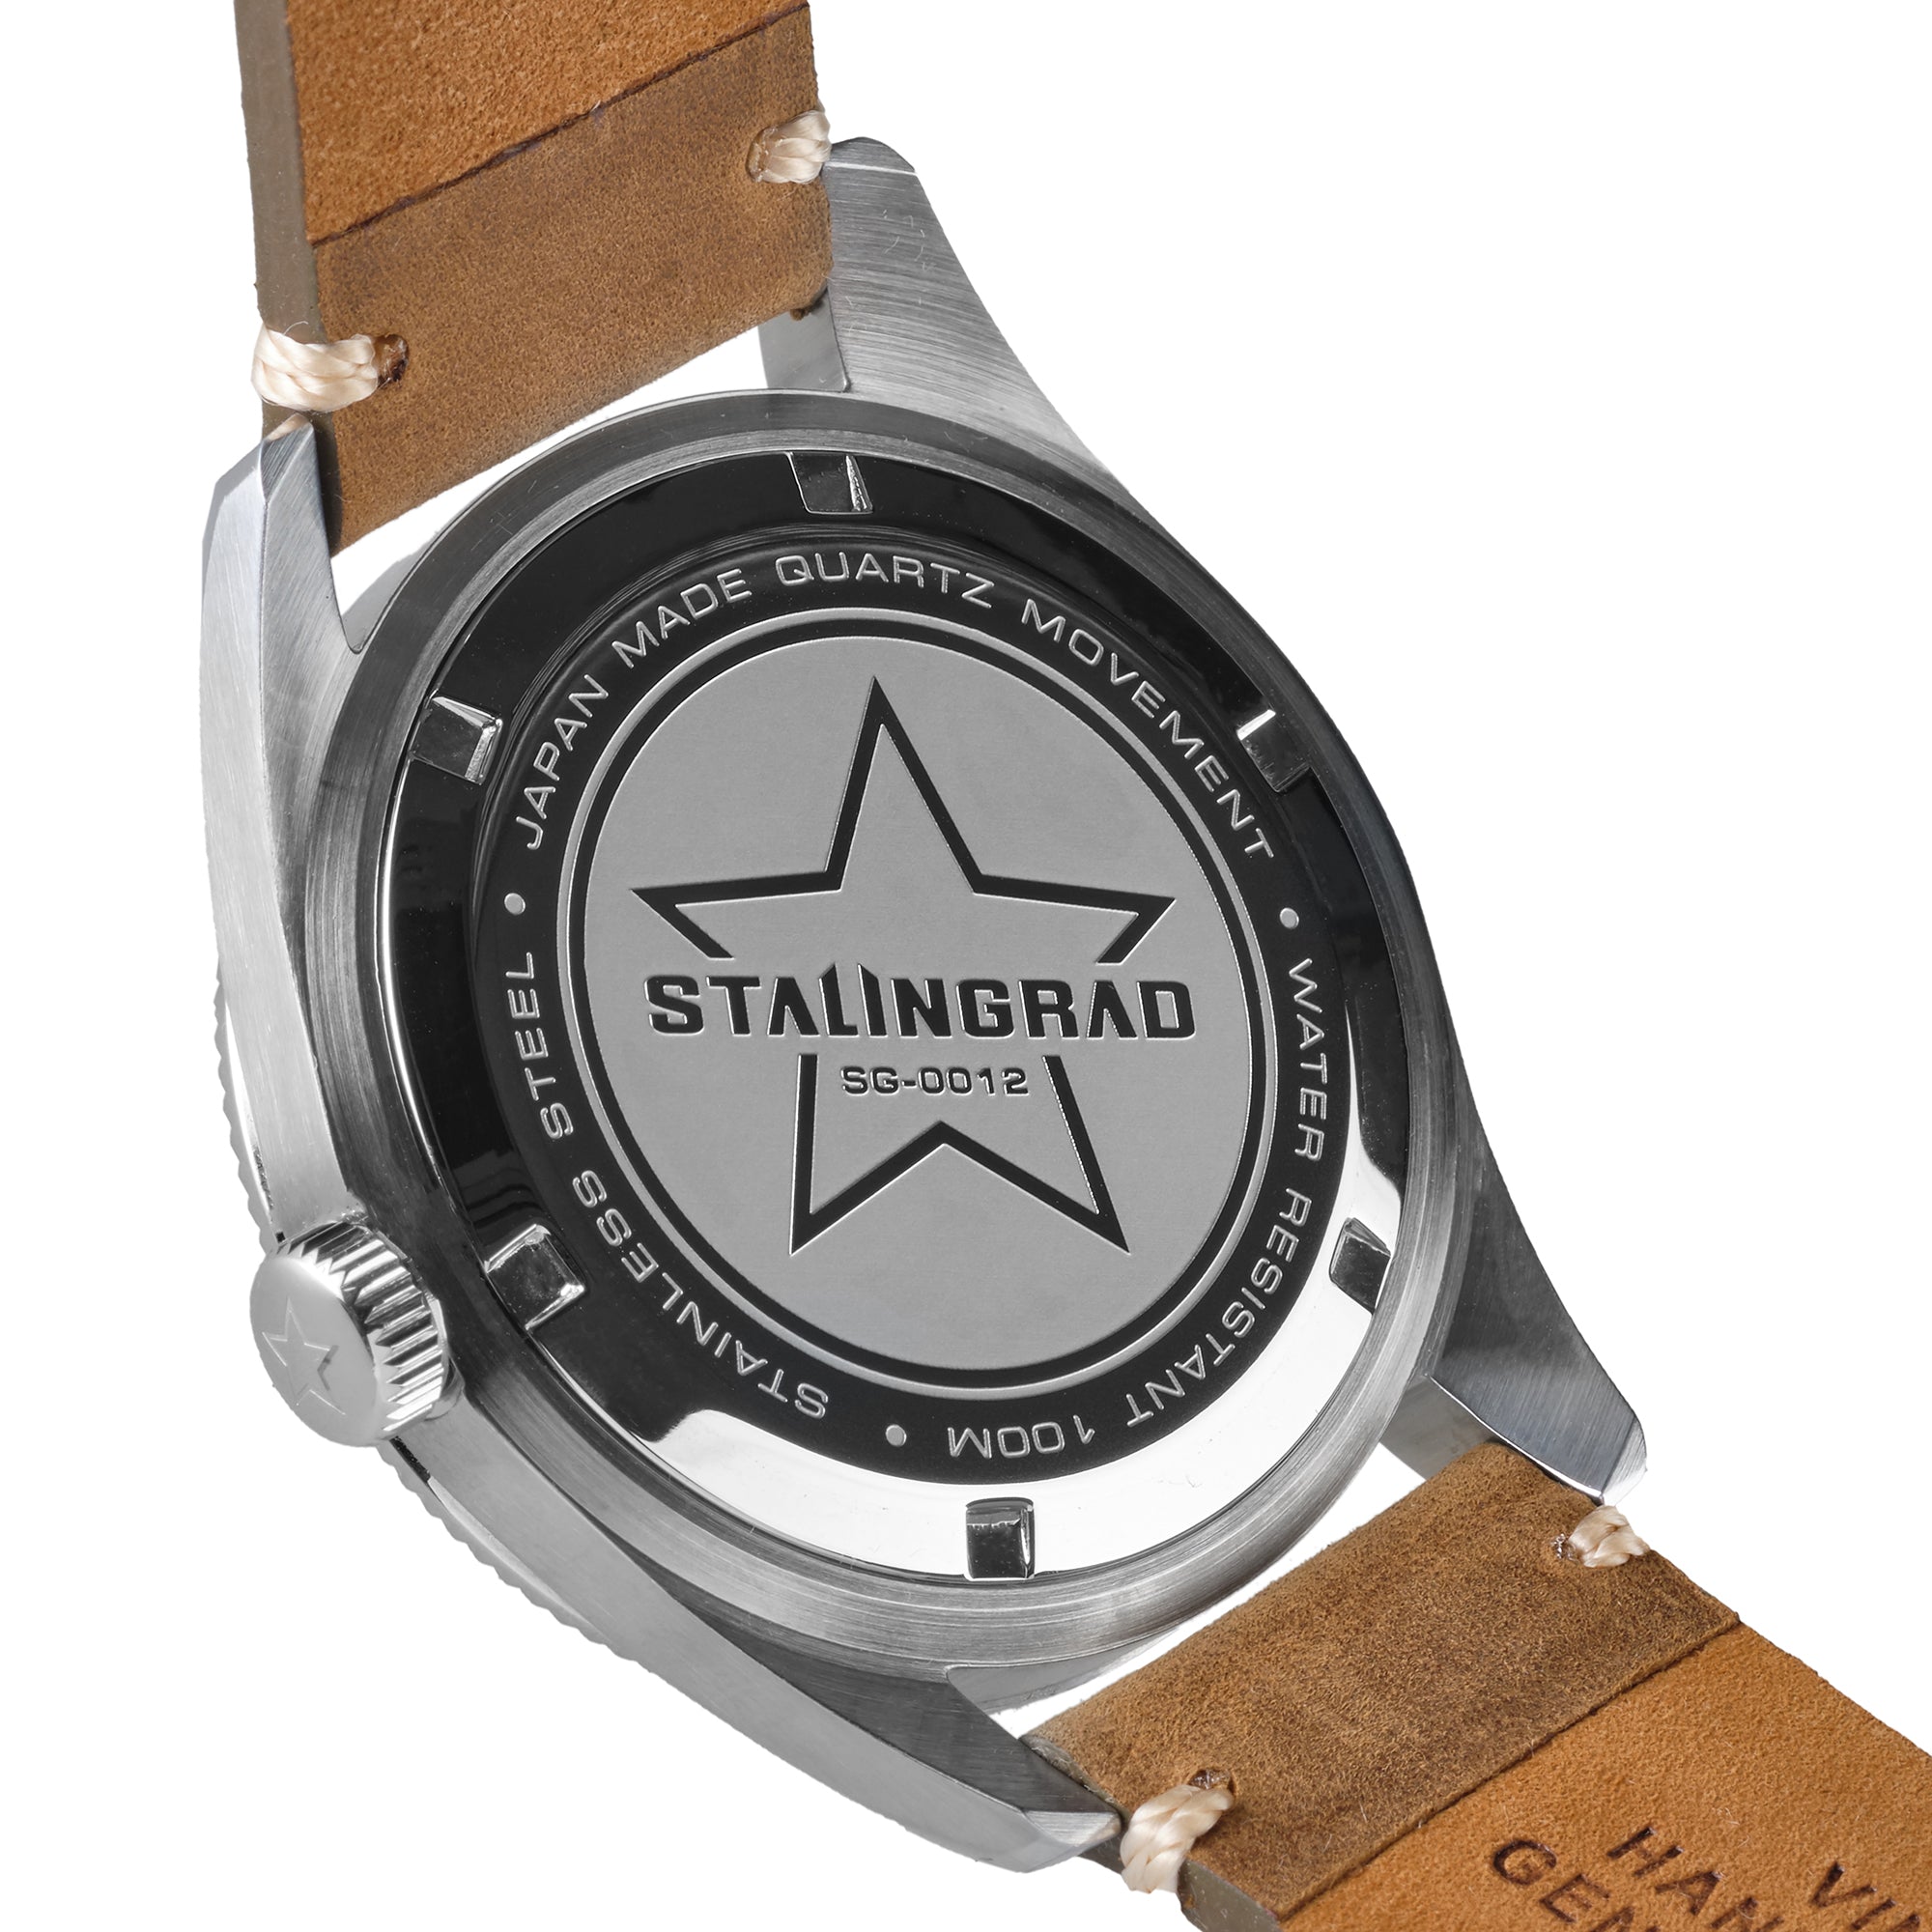 Stalingrad Iron Will Watch White Dial back view of the watch showing the stalingrad logo